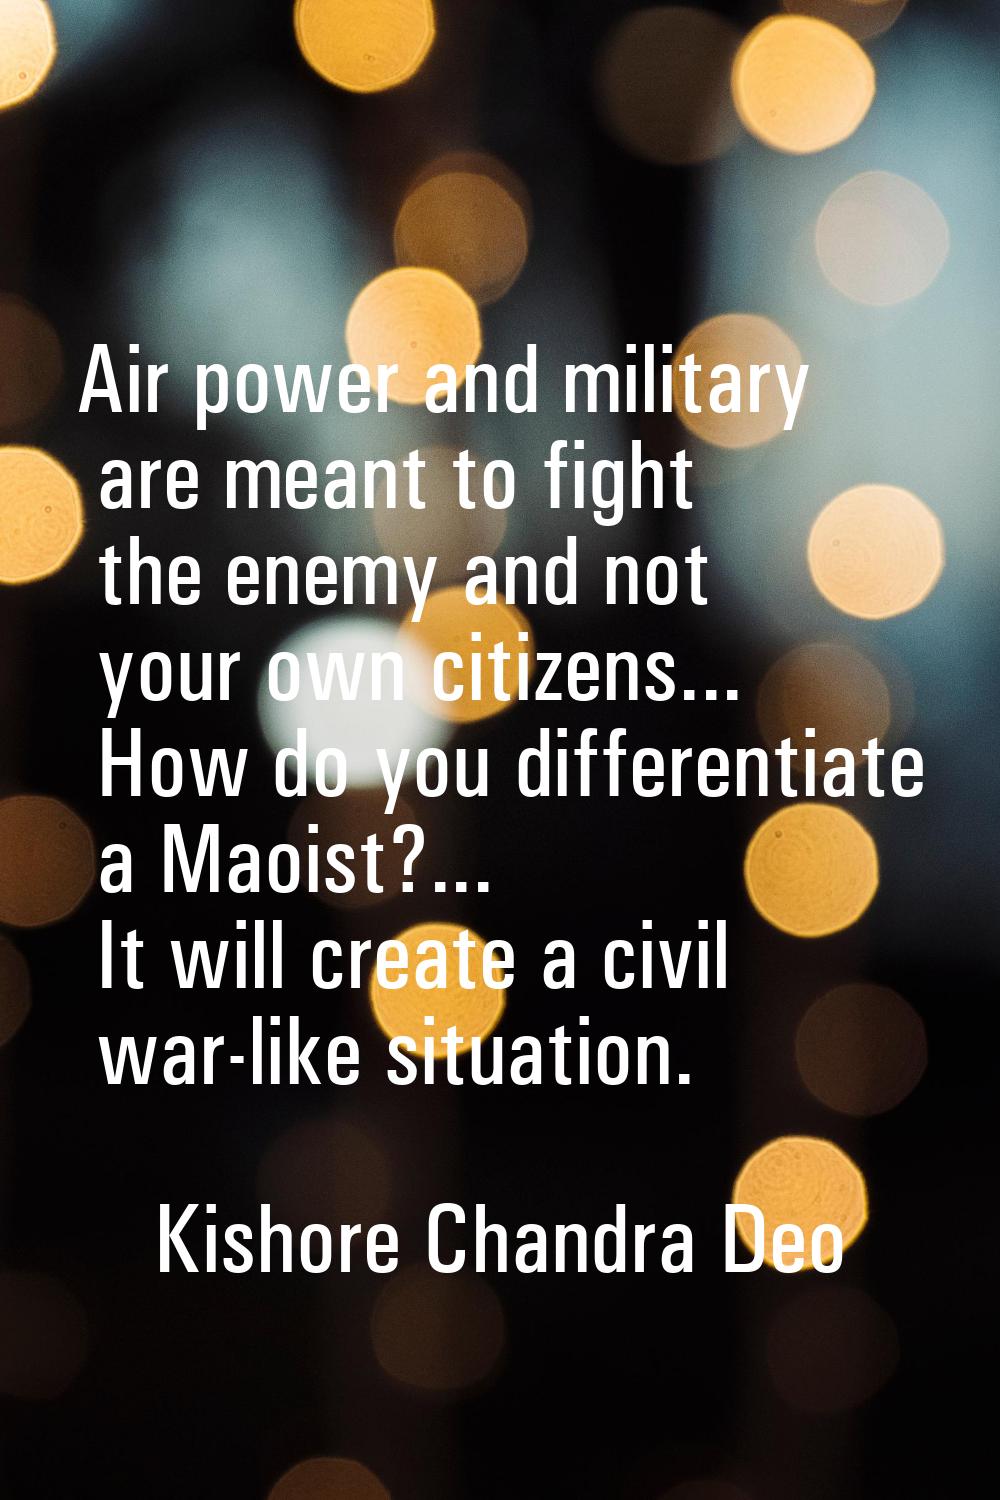 Air power and military are meant to fight the enemy and not your own citizens... How do you differe